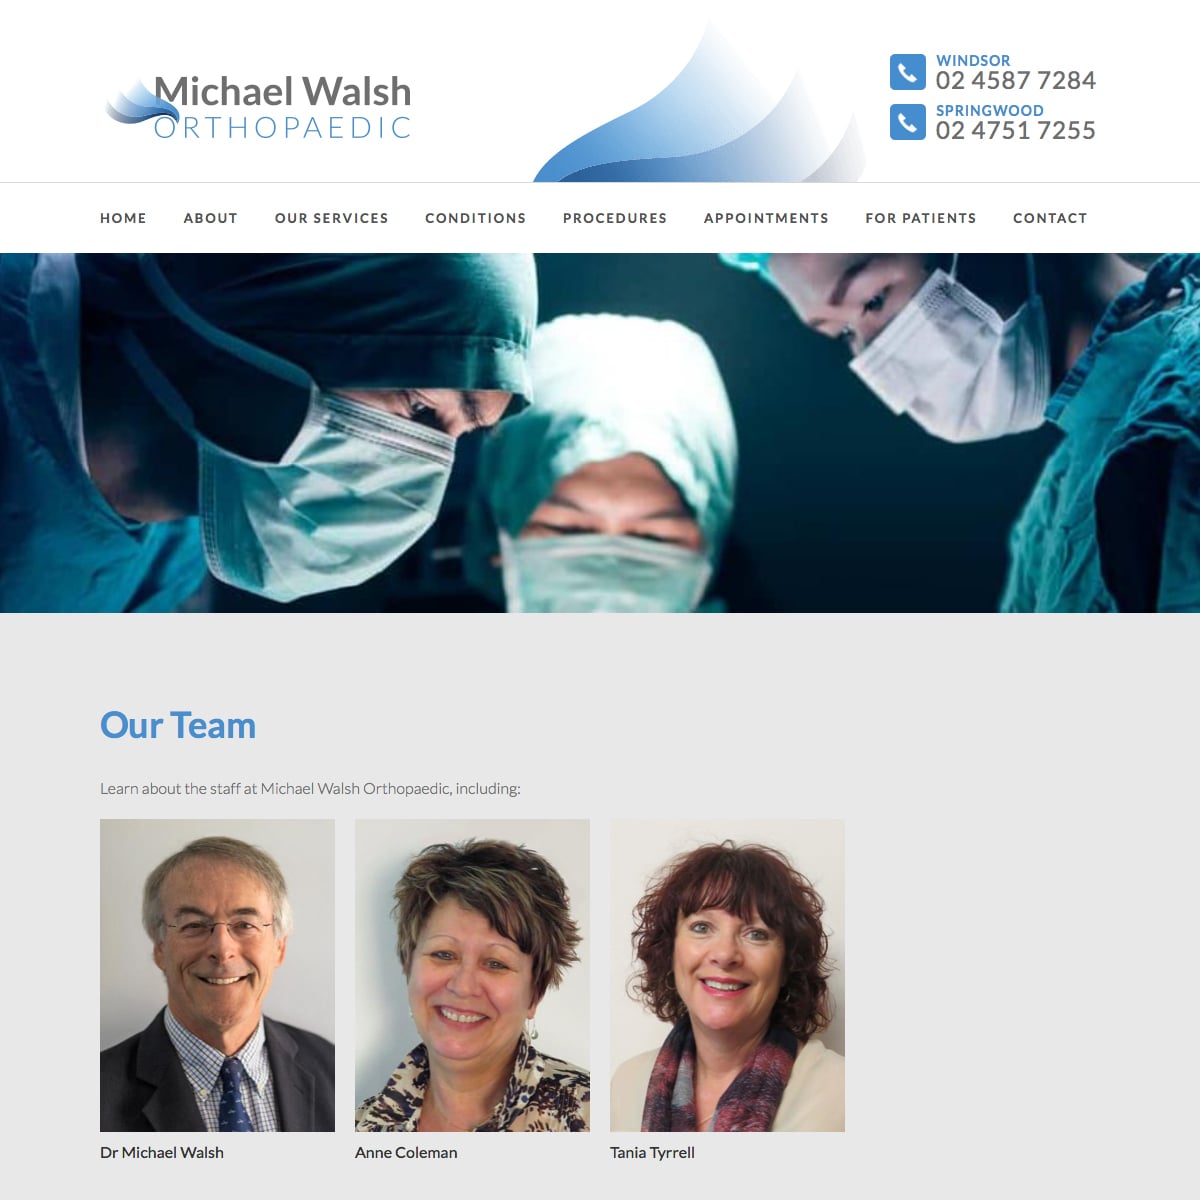 Michael Walsh Orthopaedic - Our Team